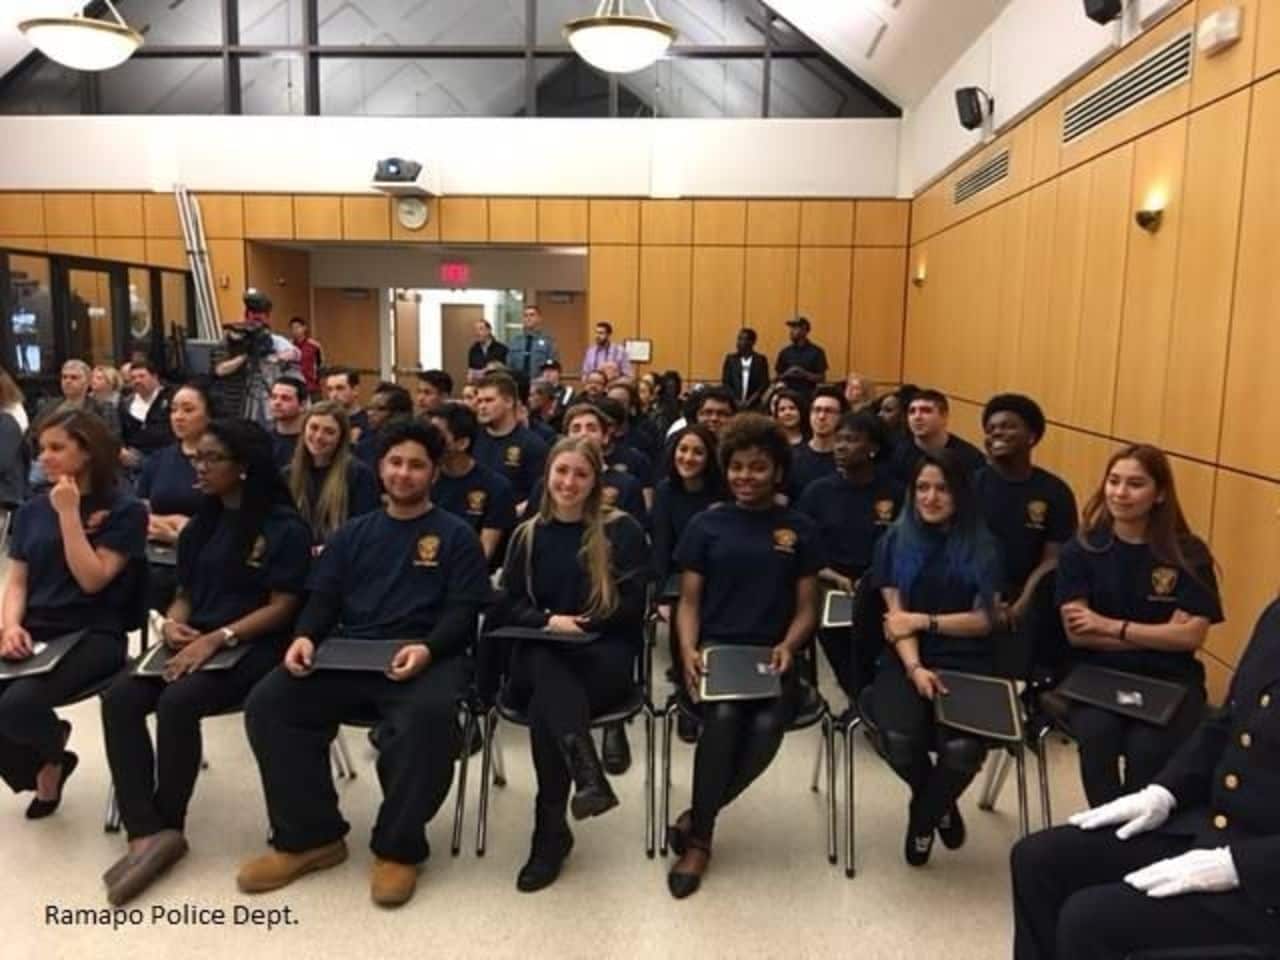 Graduates of Ramapo Police Department's Youth Academy at recent graduation ceremony.